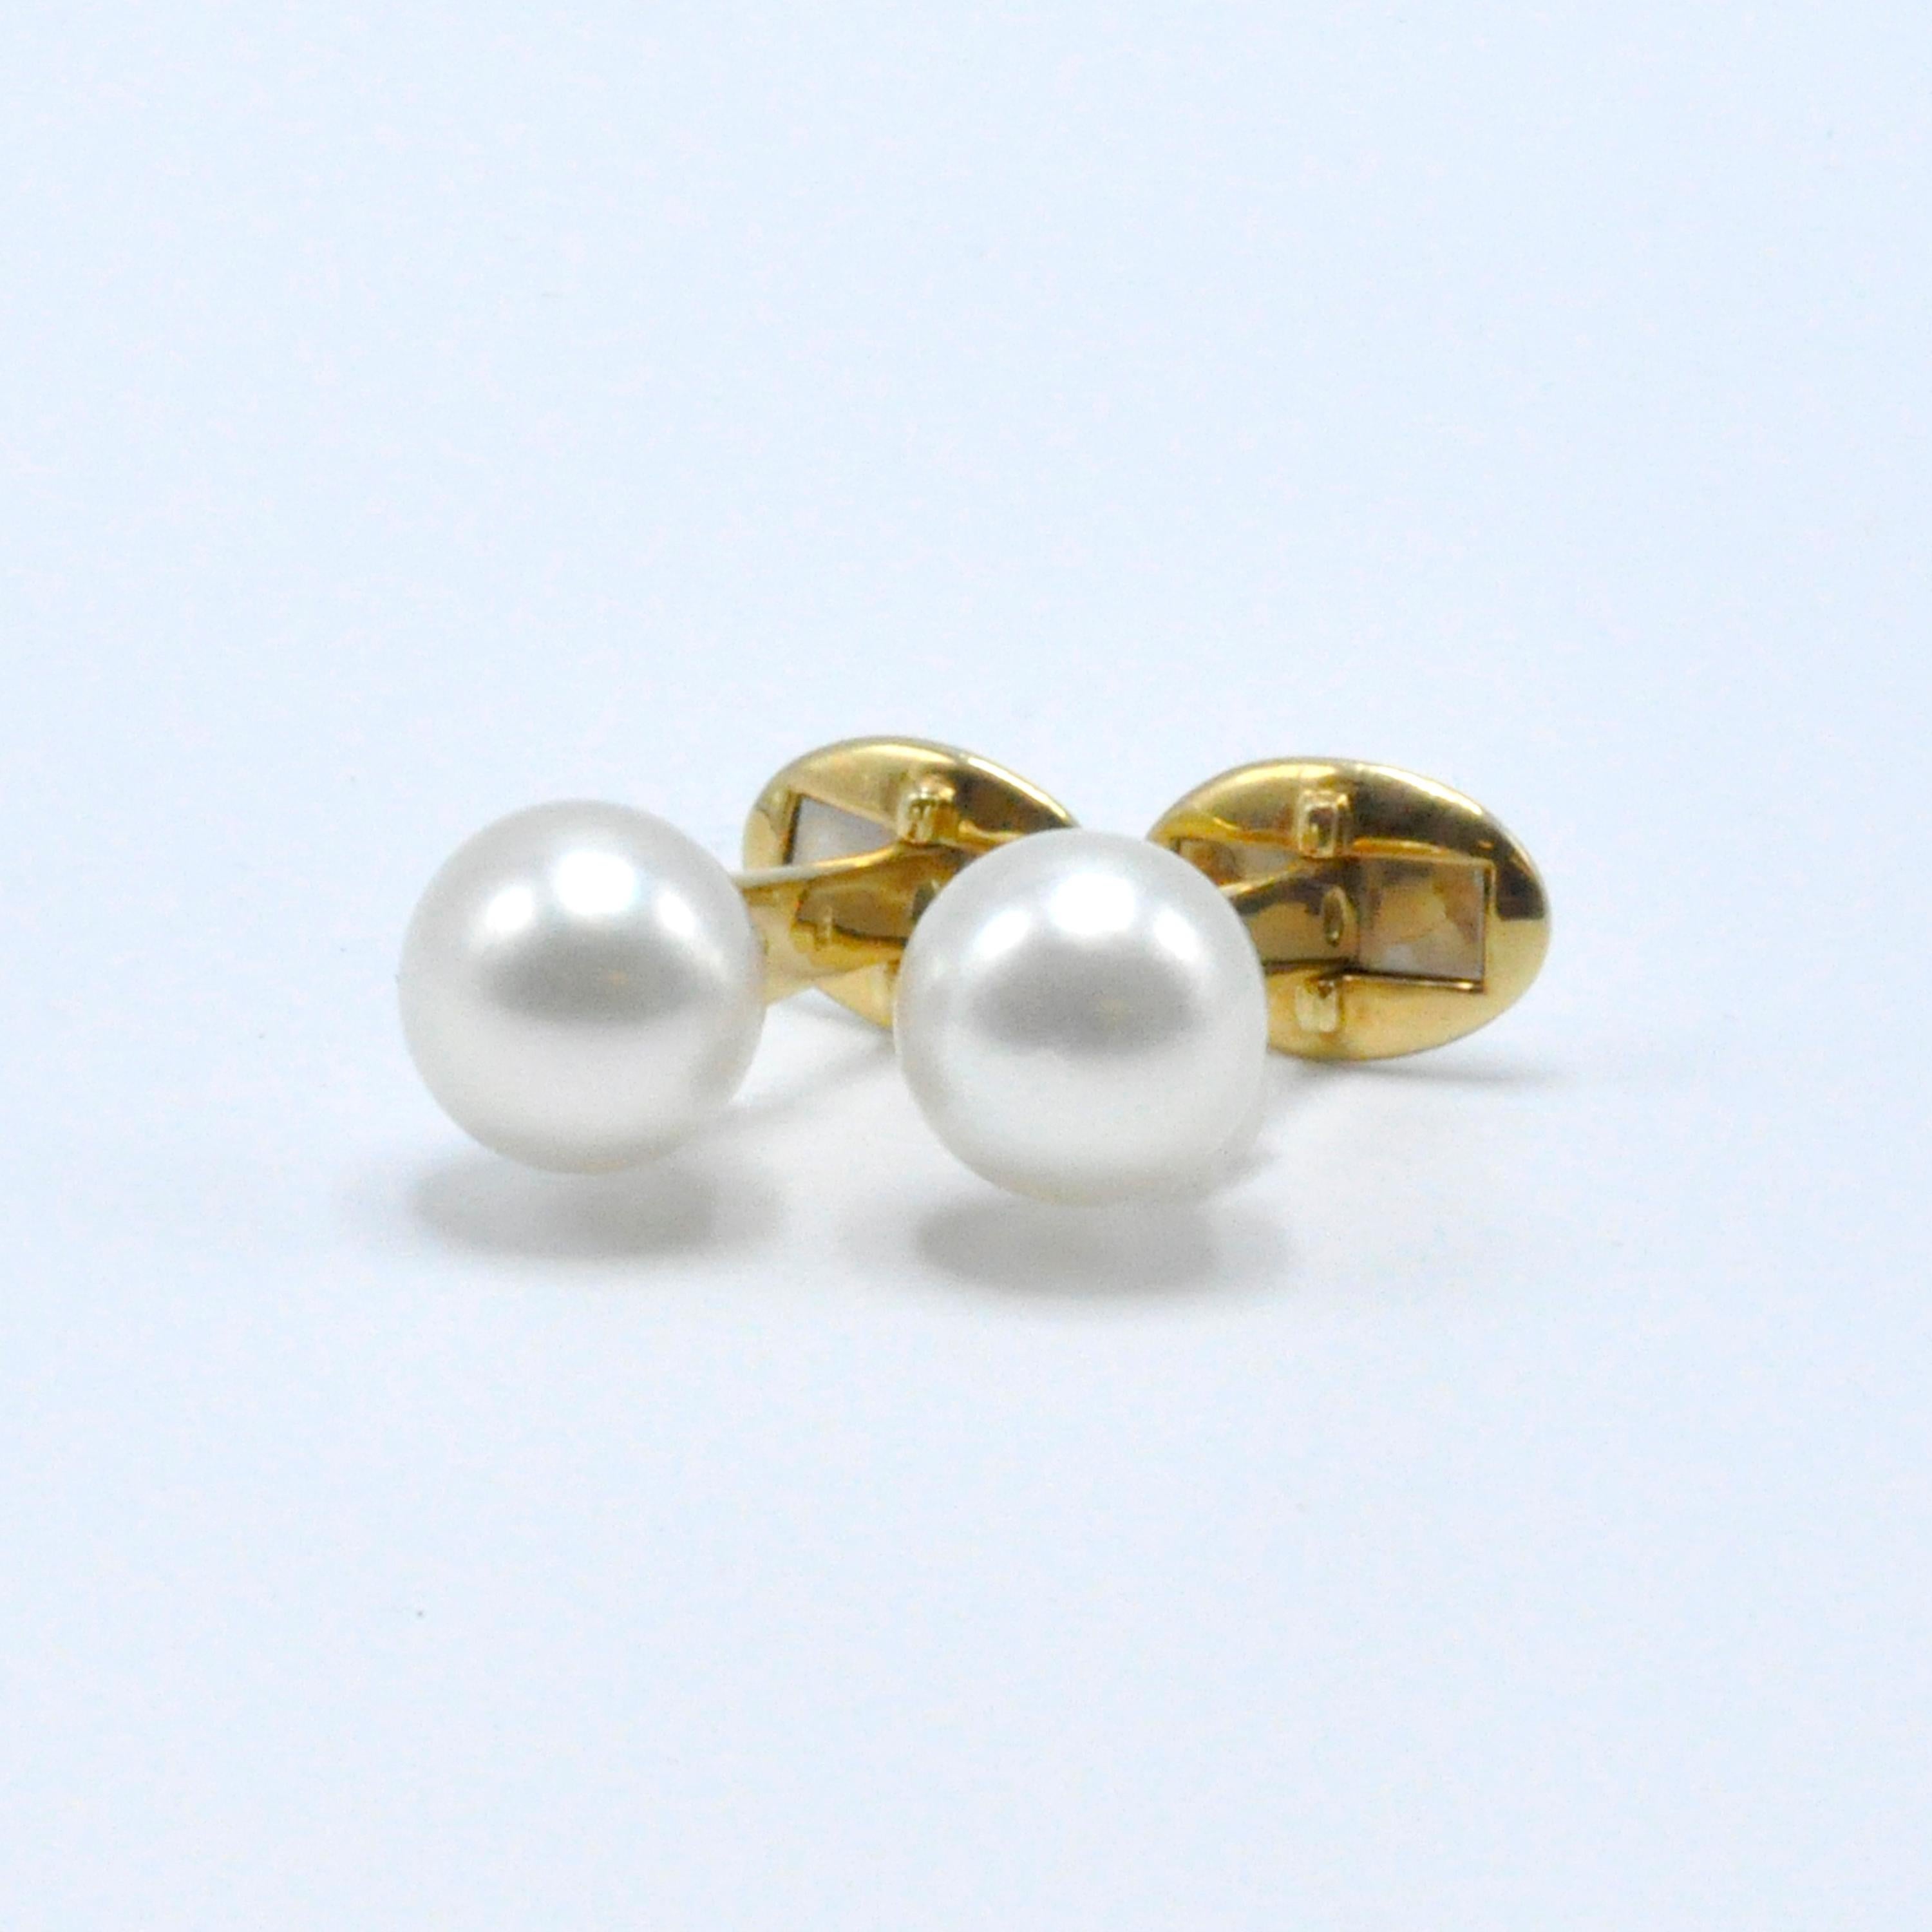 Accent your favorite suit with this pair of 18 karat yellow gold and 13 mm South Sea Pearl Cufflinks.

Stamped: 750

From the Skibell Estate Collection
